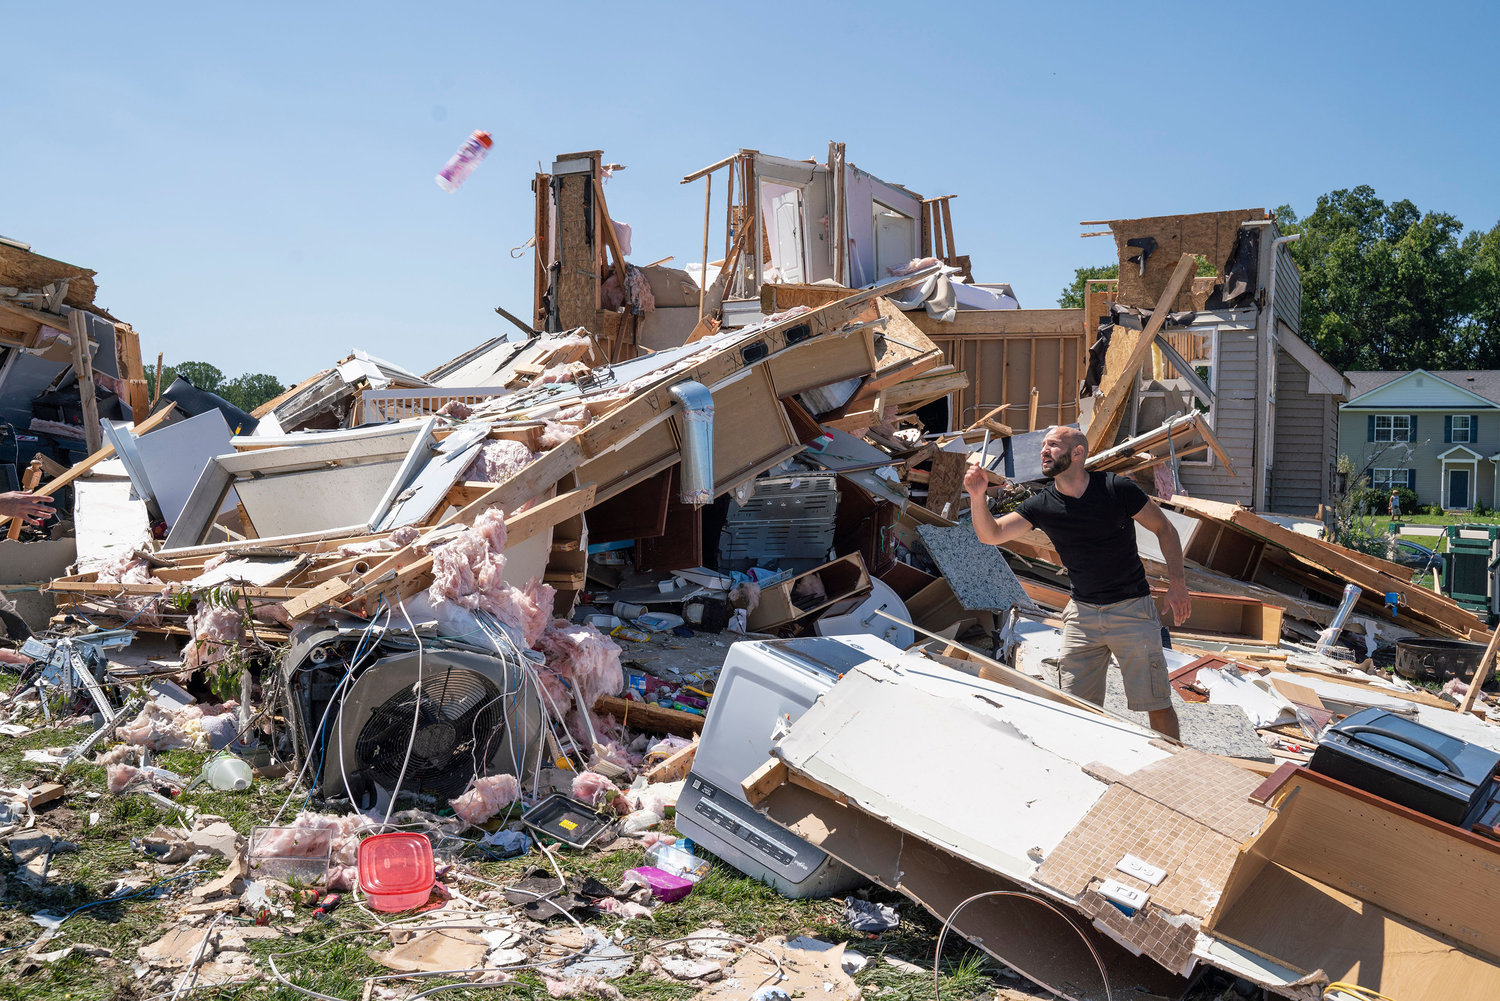 Sam Catrambone clears debris away from a friend's home, damaged by a tornado in Mullica Hill, New Jersey on Sept. 2, 2021 after record-breaking rainfall brought by the remnants of Hurricane Ida swept through the area. (Branden Eastwood/AFP/Getty Images/TNS)